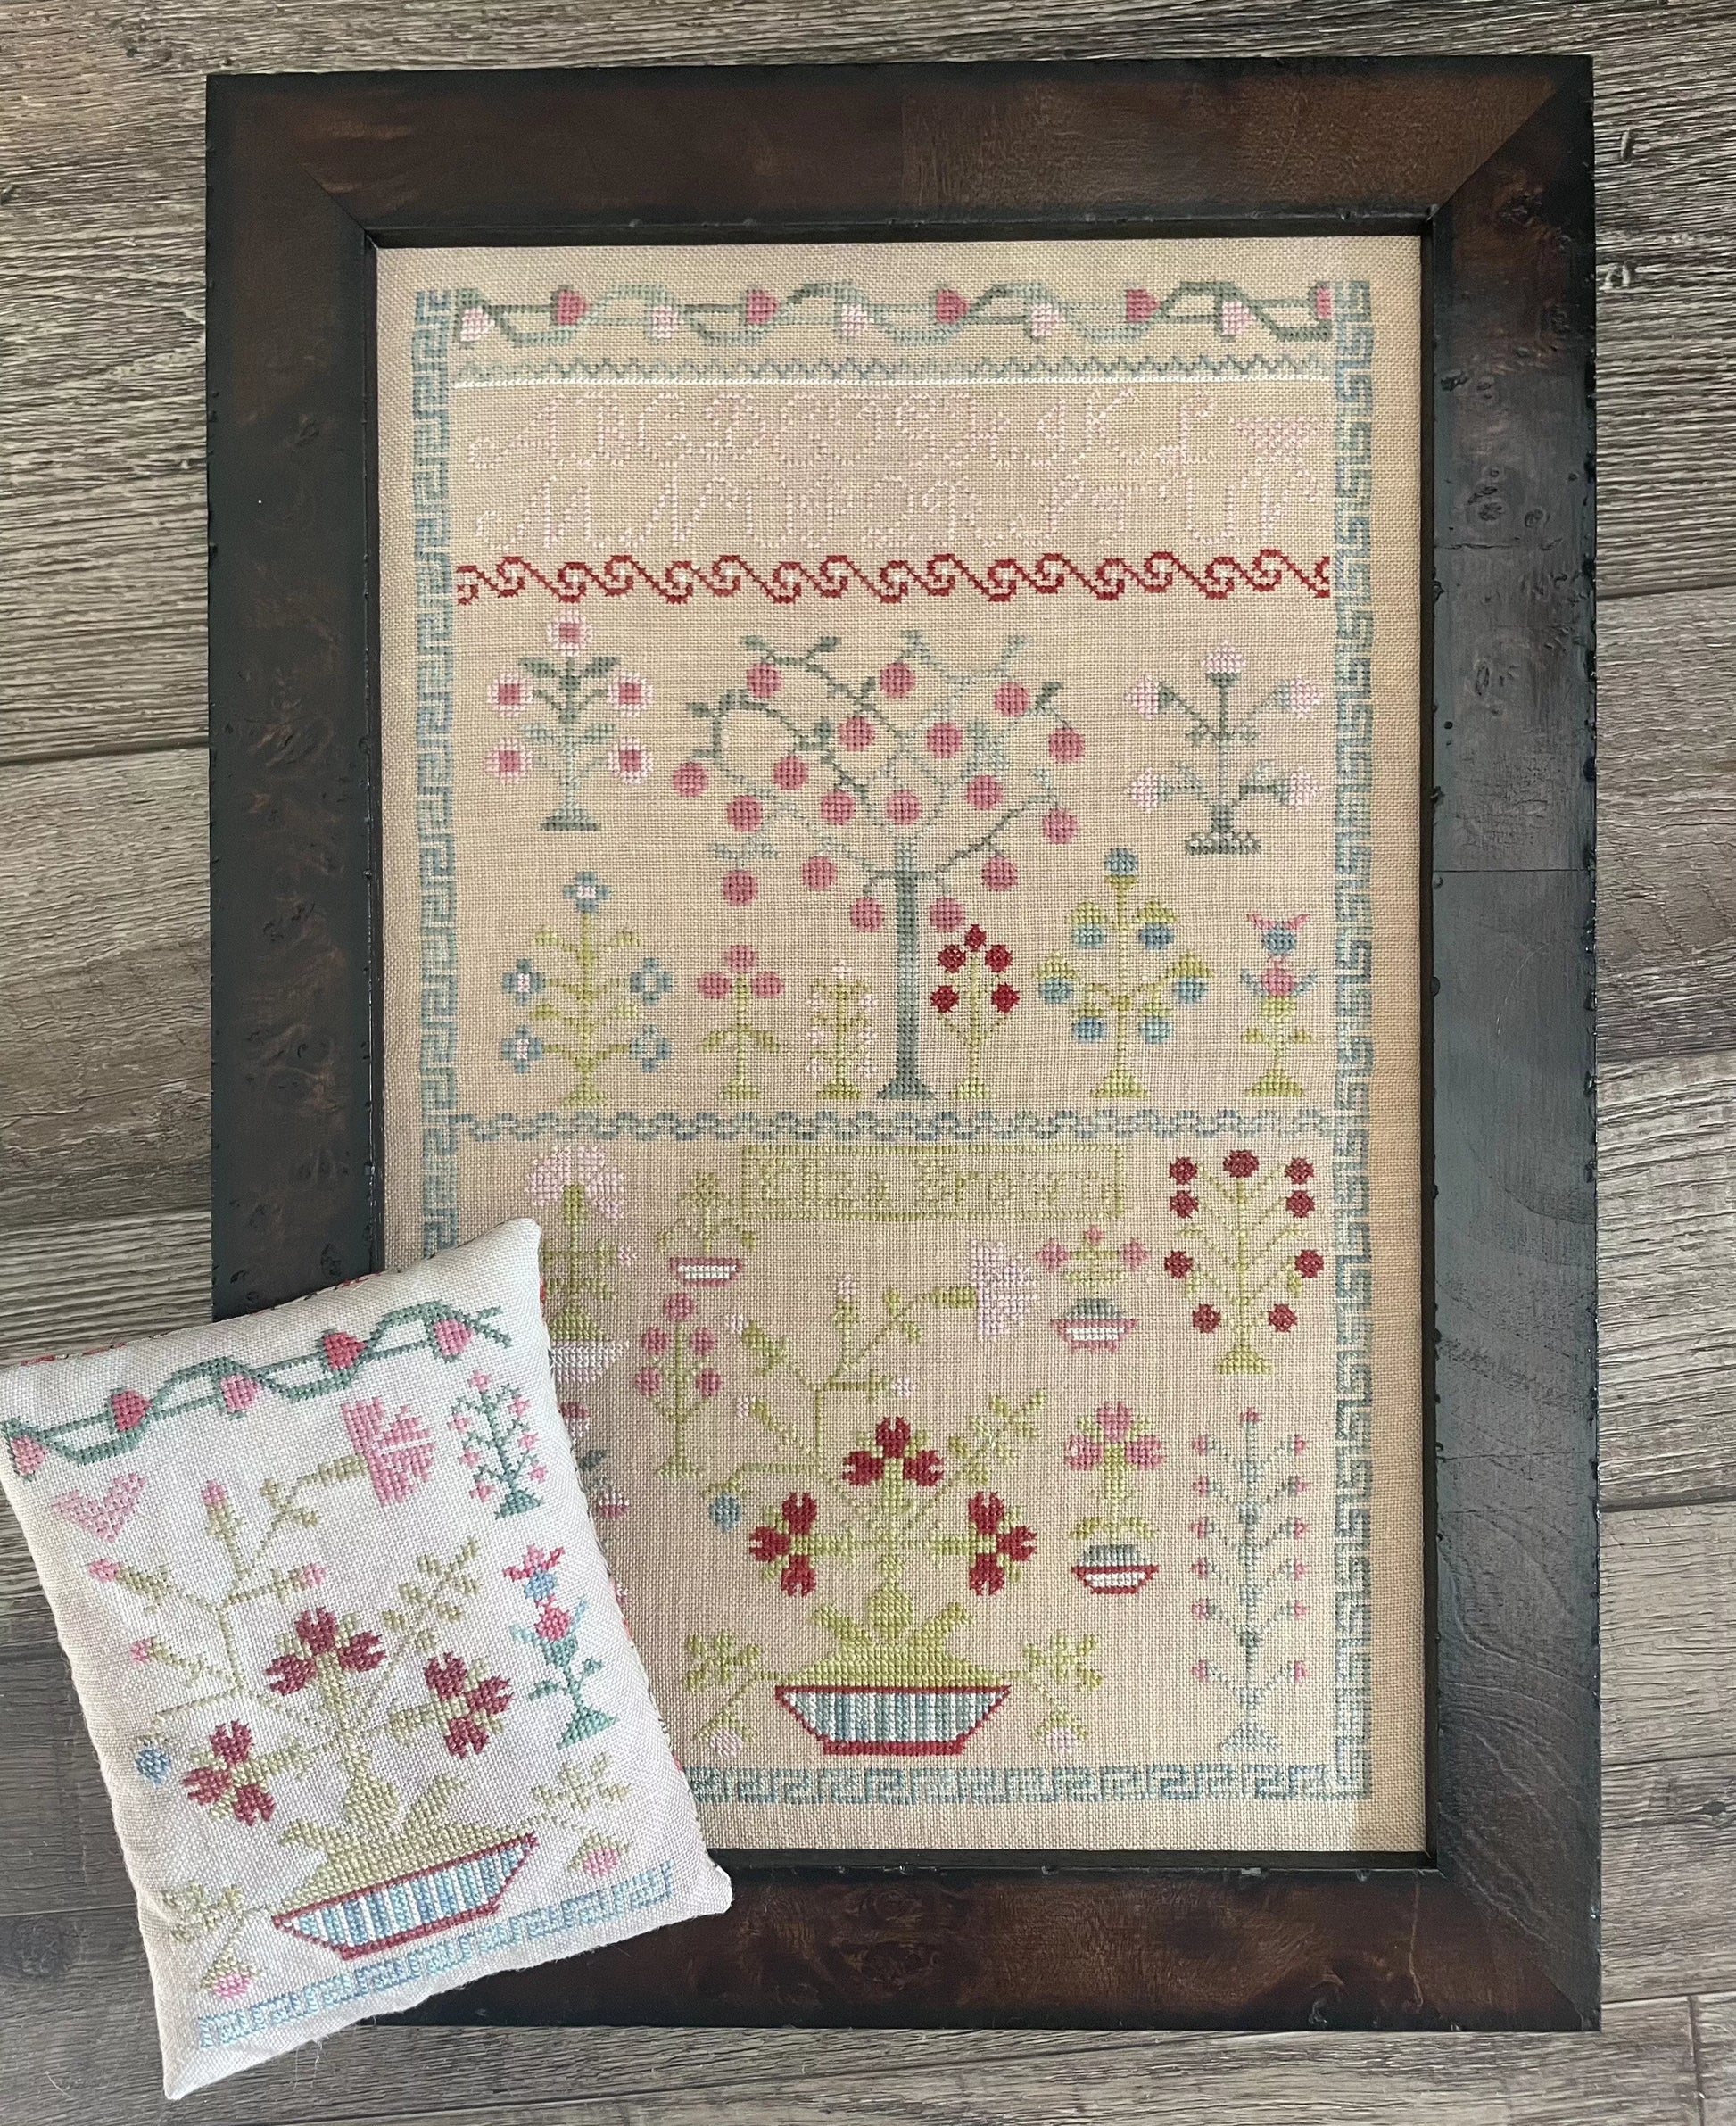 Eliza Brown - From the Heart - Cross Stitch Pattern, Needlecraft Patterns, Needlecraft Patterns, The Crafty Grimalkin - A Cross Stitch Store